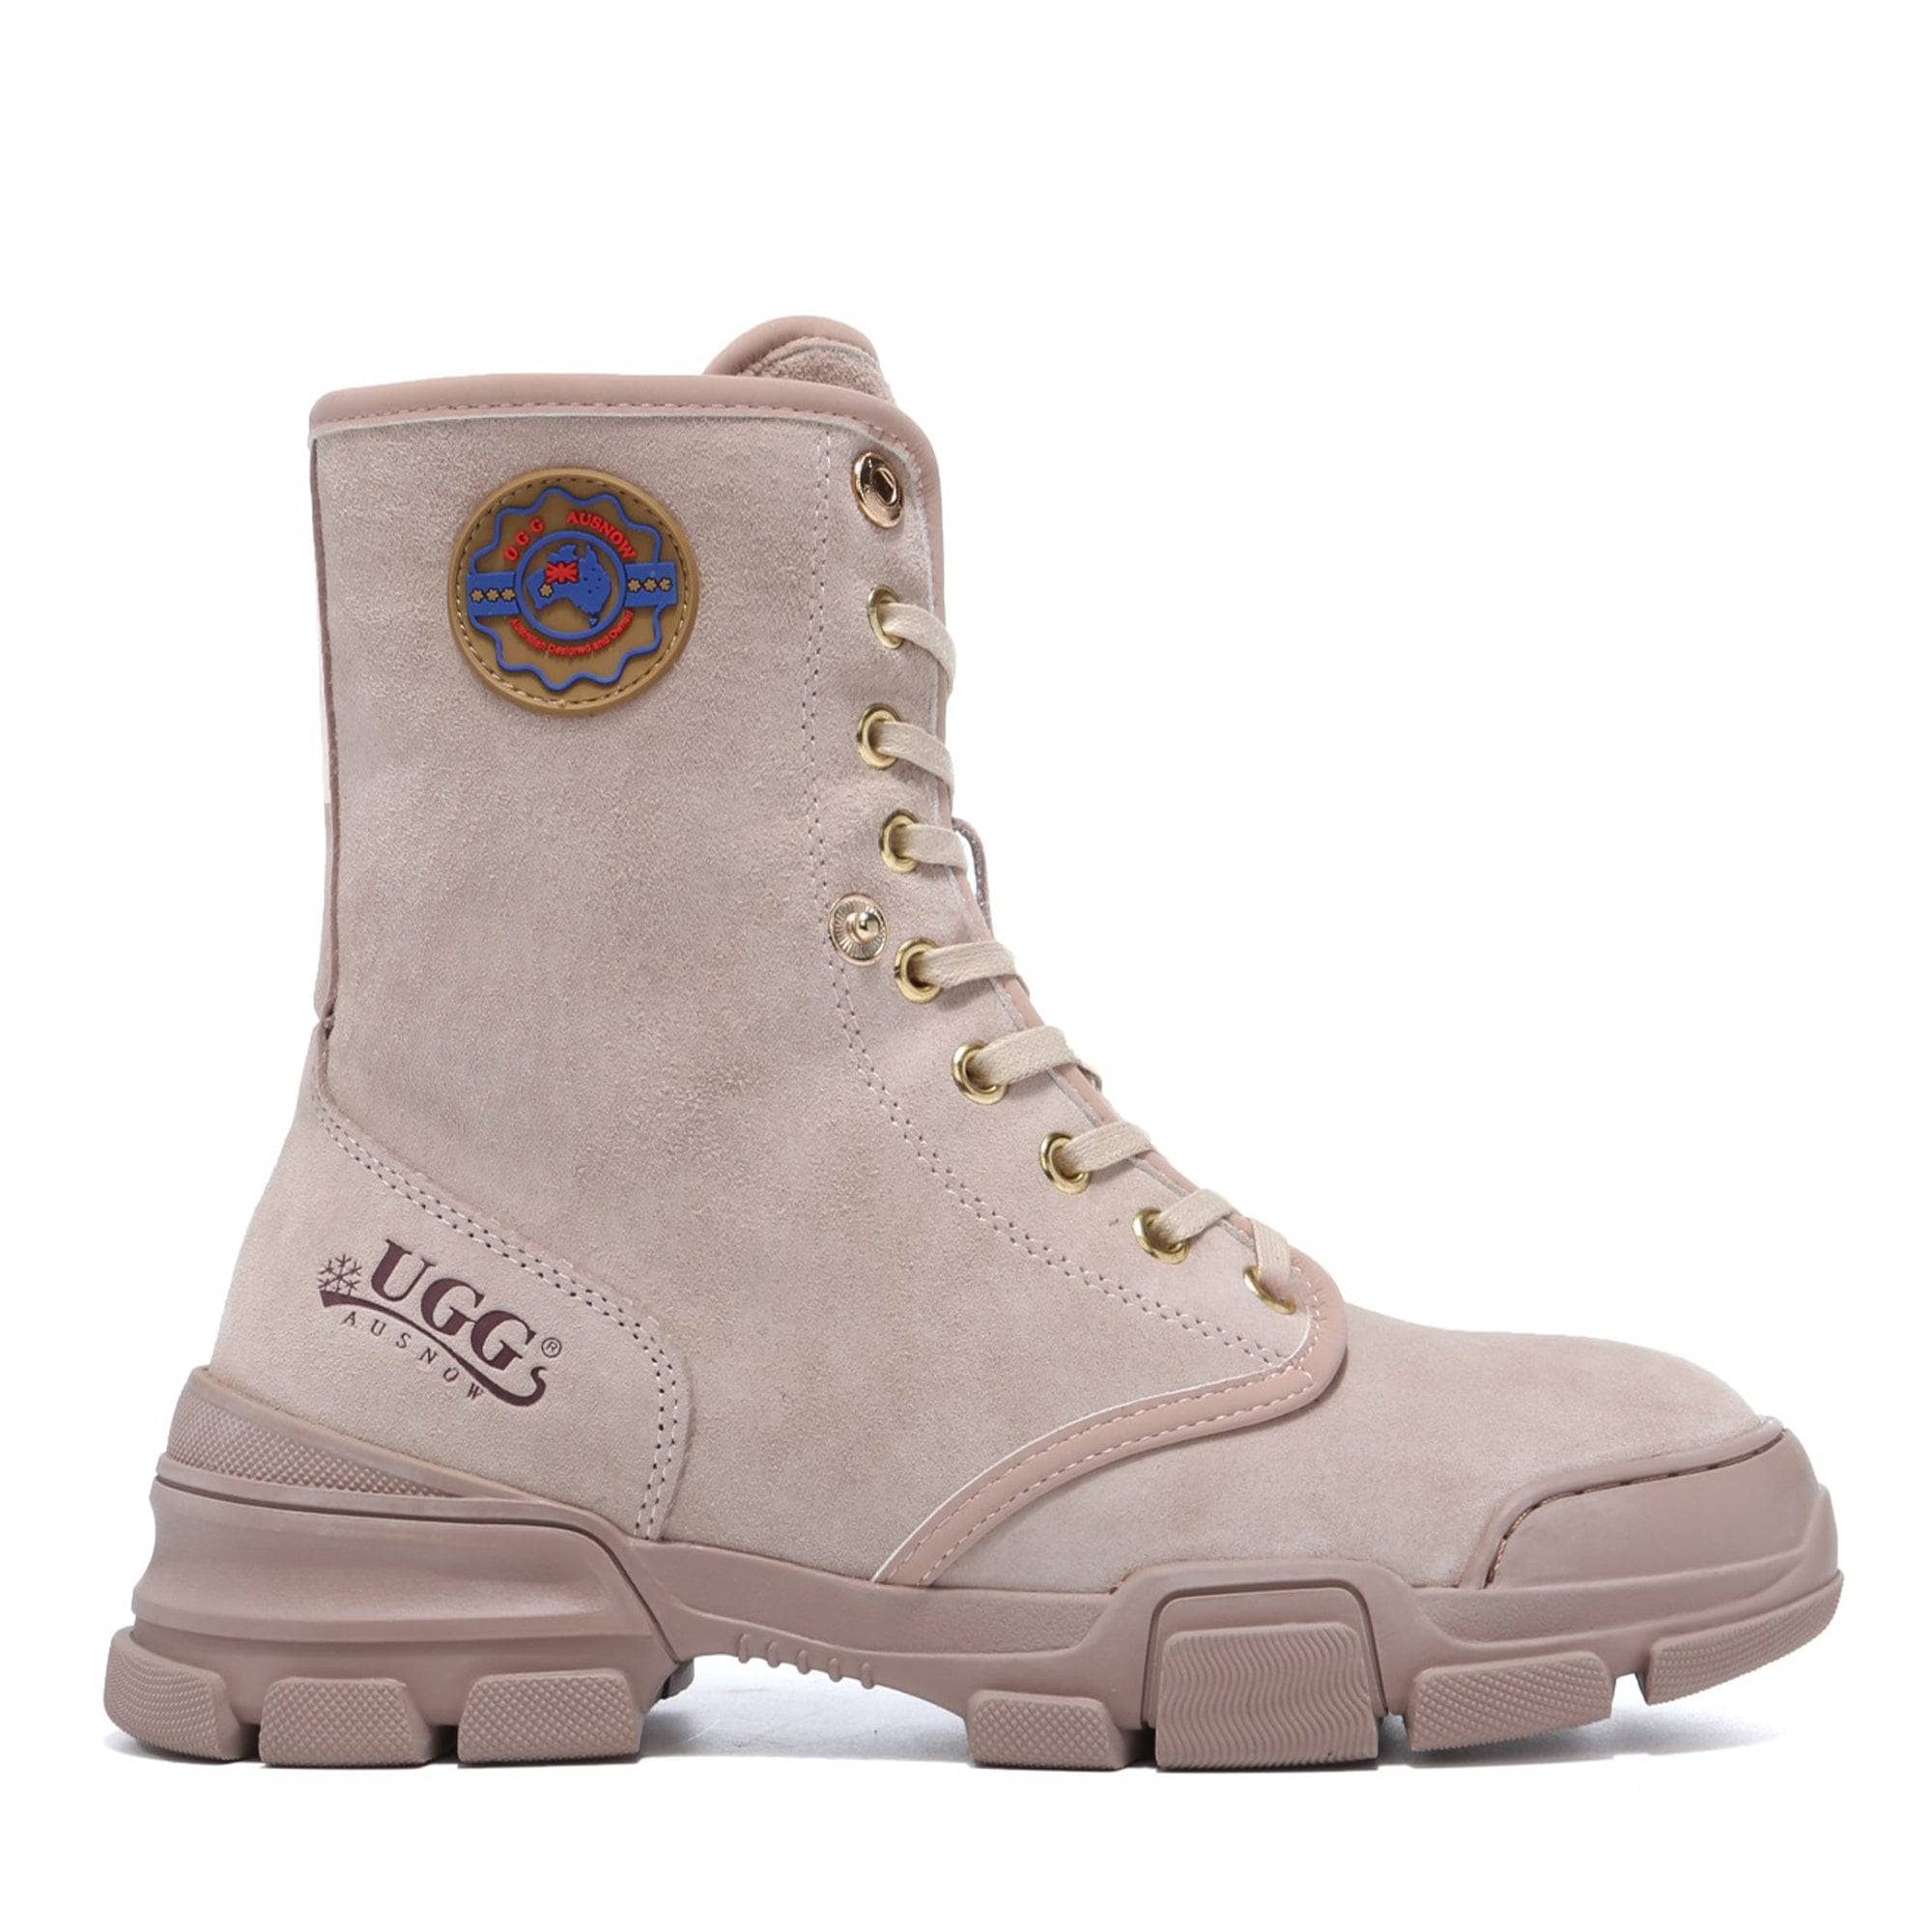 Outdoor Ugg Boots - UGG Jane Lace Up Boots - Original UGG Australia Classic